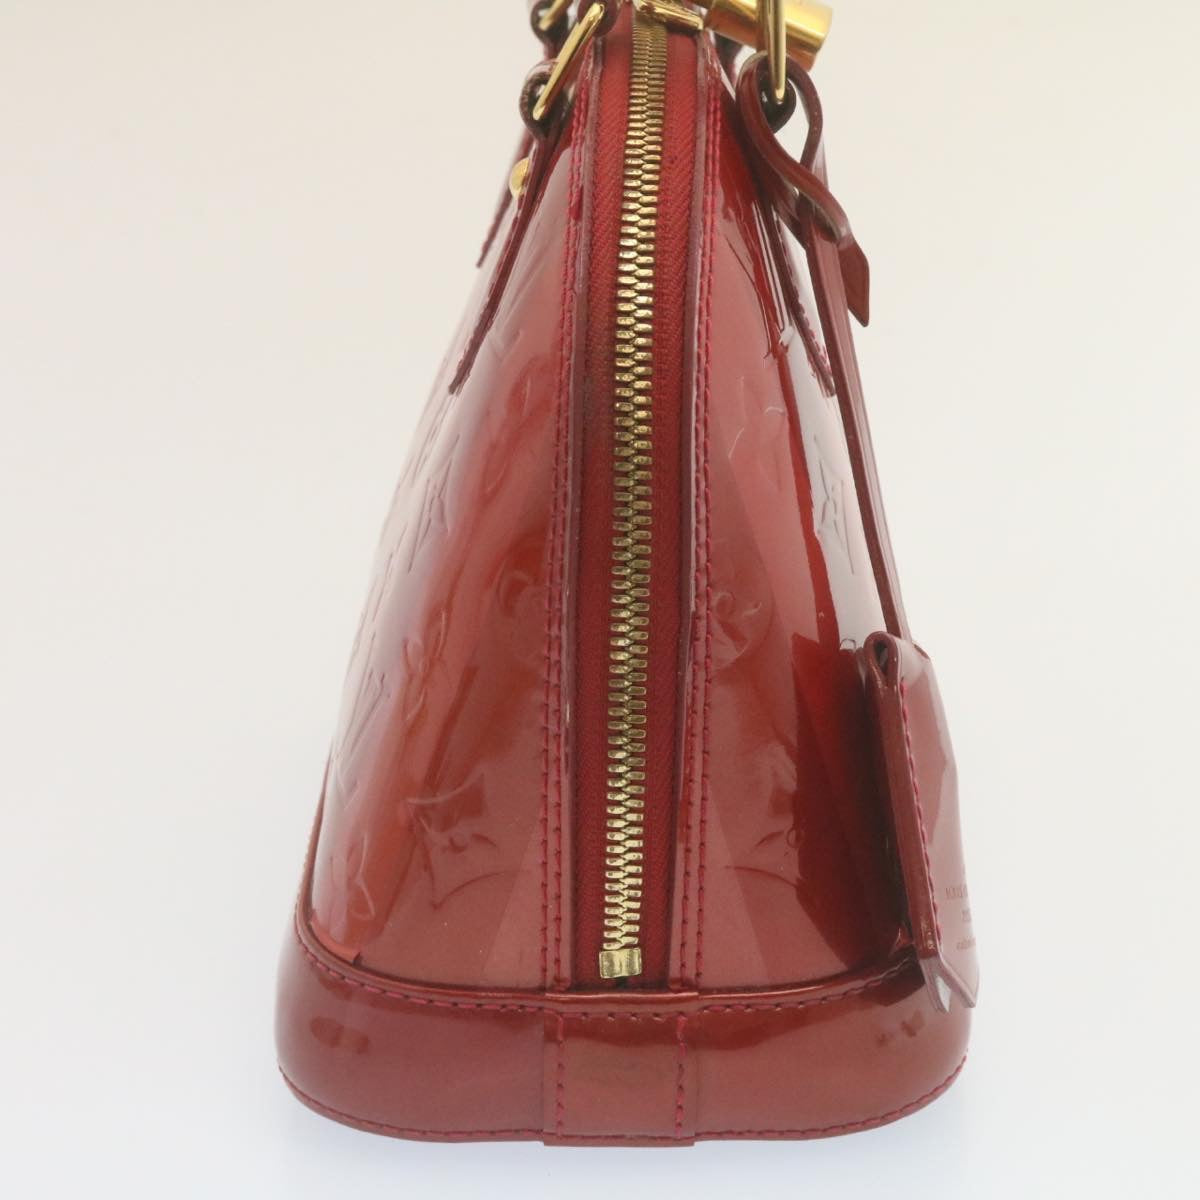 LOUIS VUITTON Vernis Rayures Alma BB Hand Bag Red LV Auth tp198